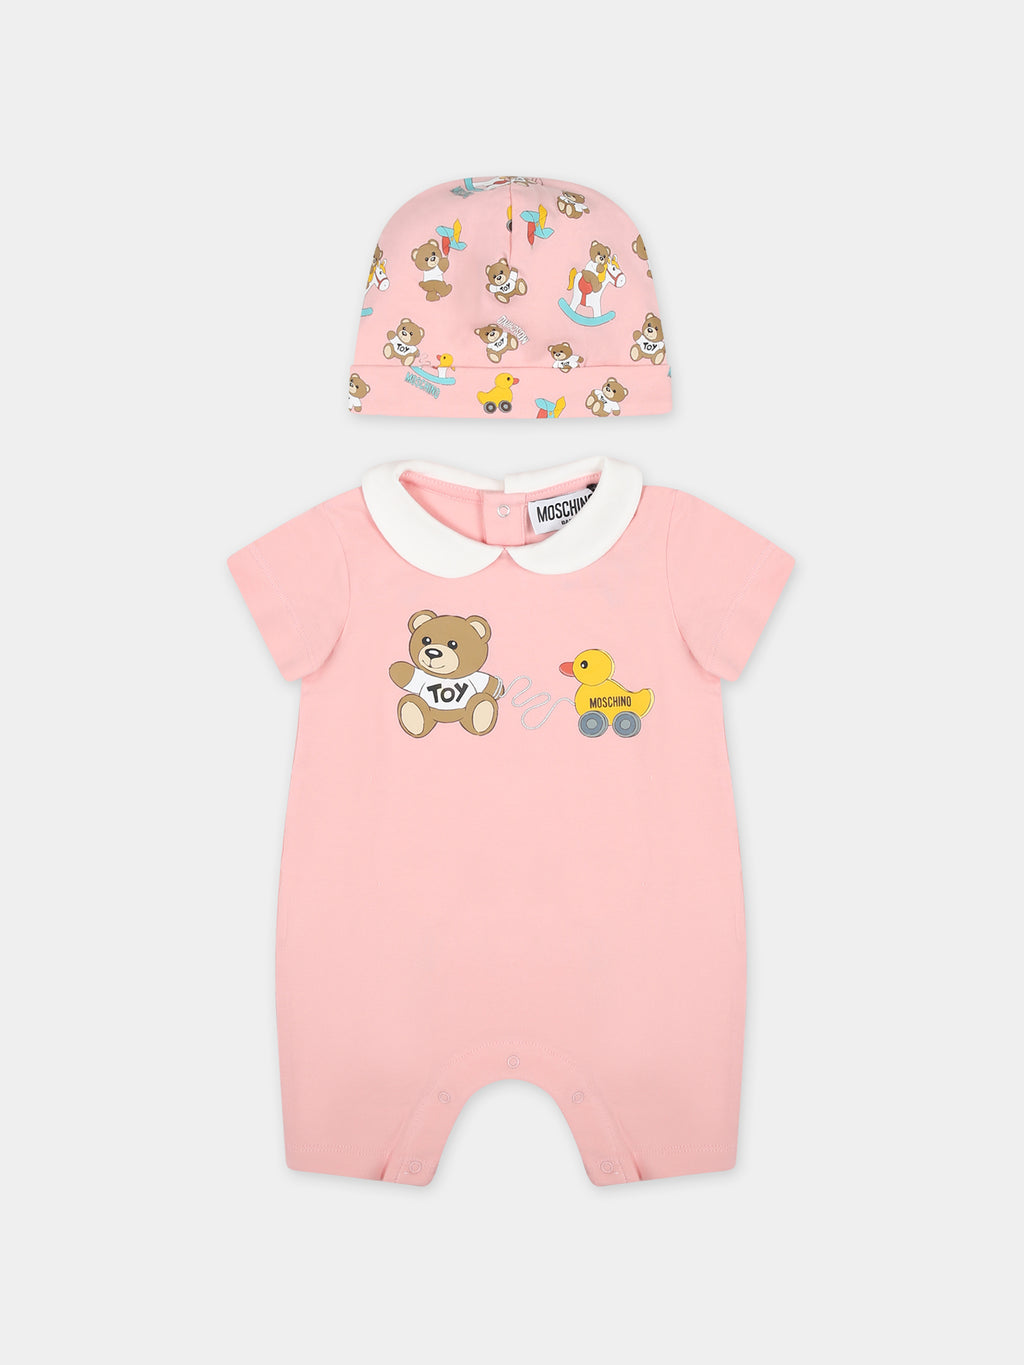 Pink set for baby girl with Teddy Bear